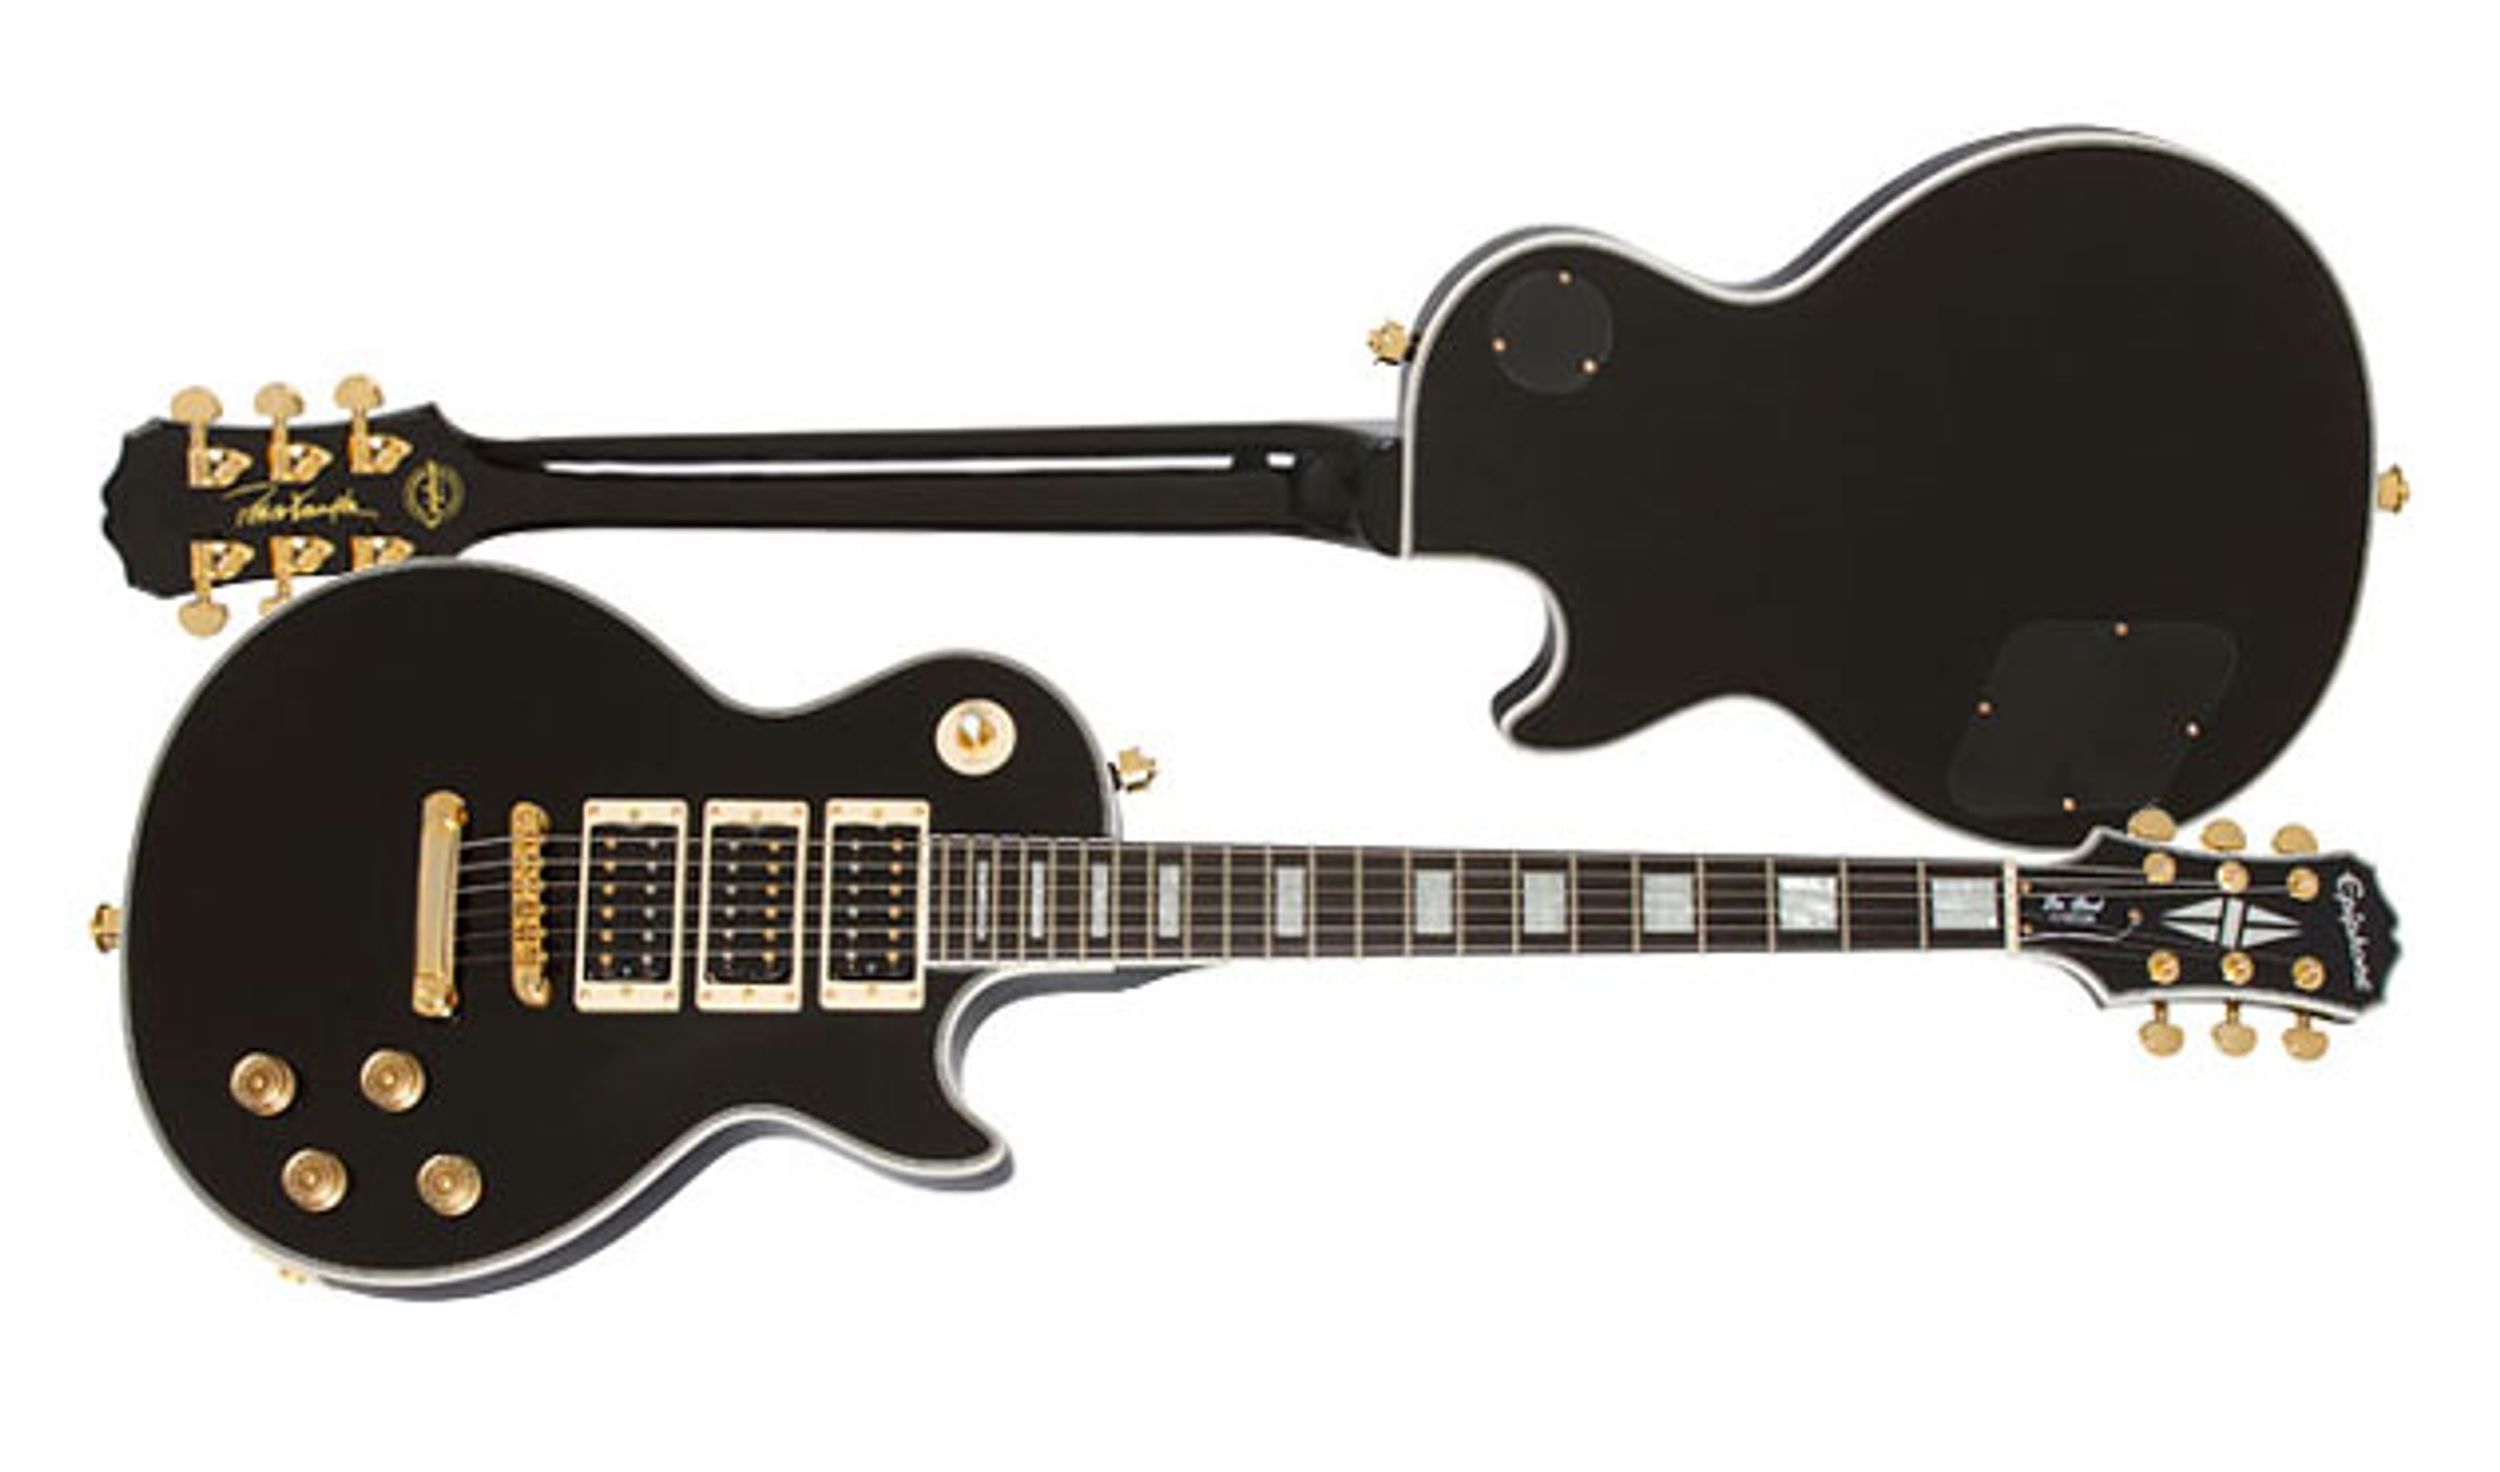 Epiphone Unveils the Limited-Edition Peter Frampton Les Paul Custom PRO and 1964 Texan Models